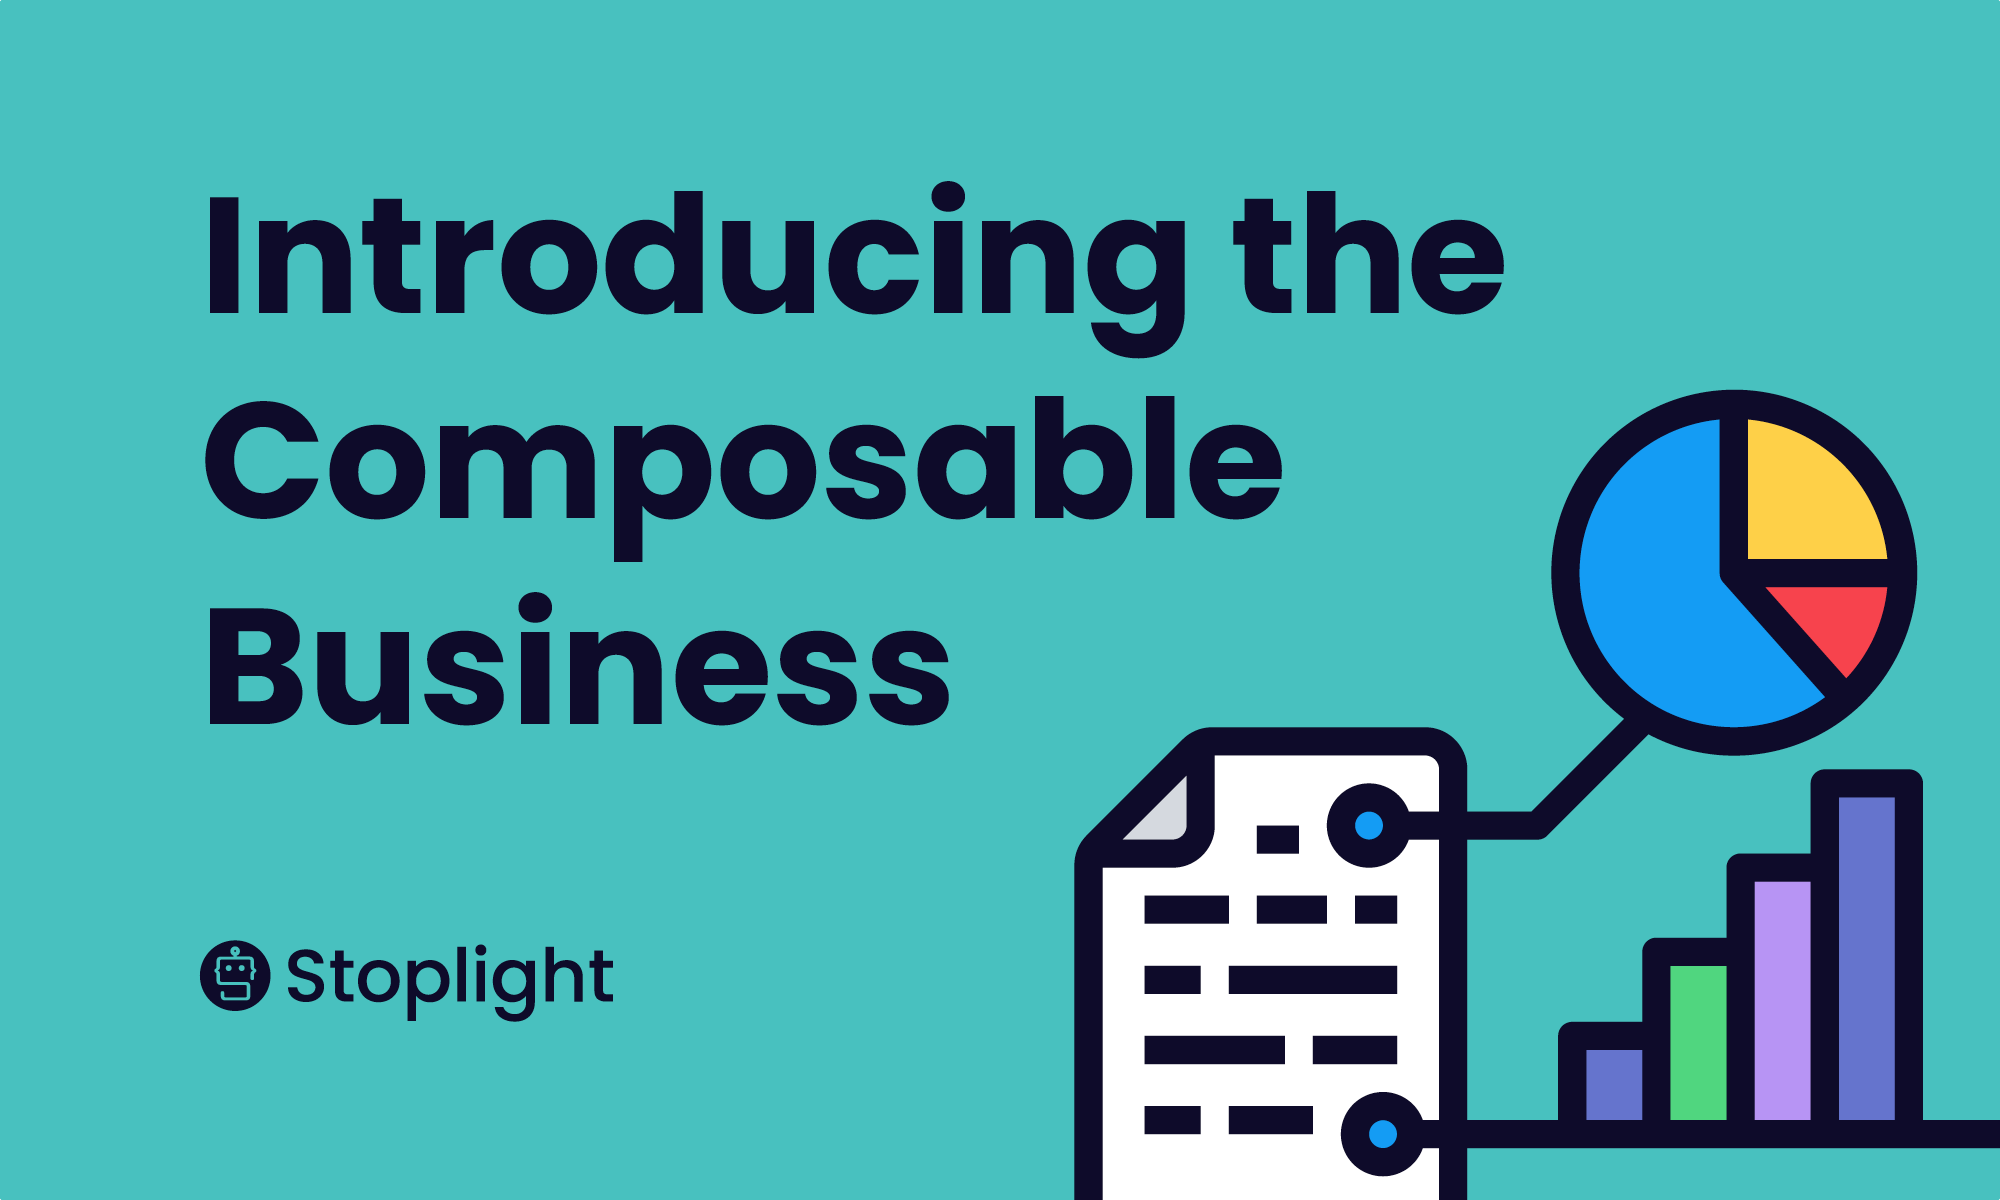 Introducing the Composable Business: How Customer-Centered APIs are Empowering Executives to Open New Markets